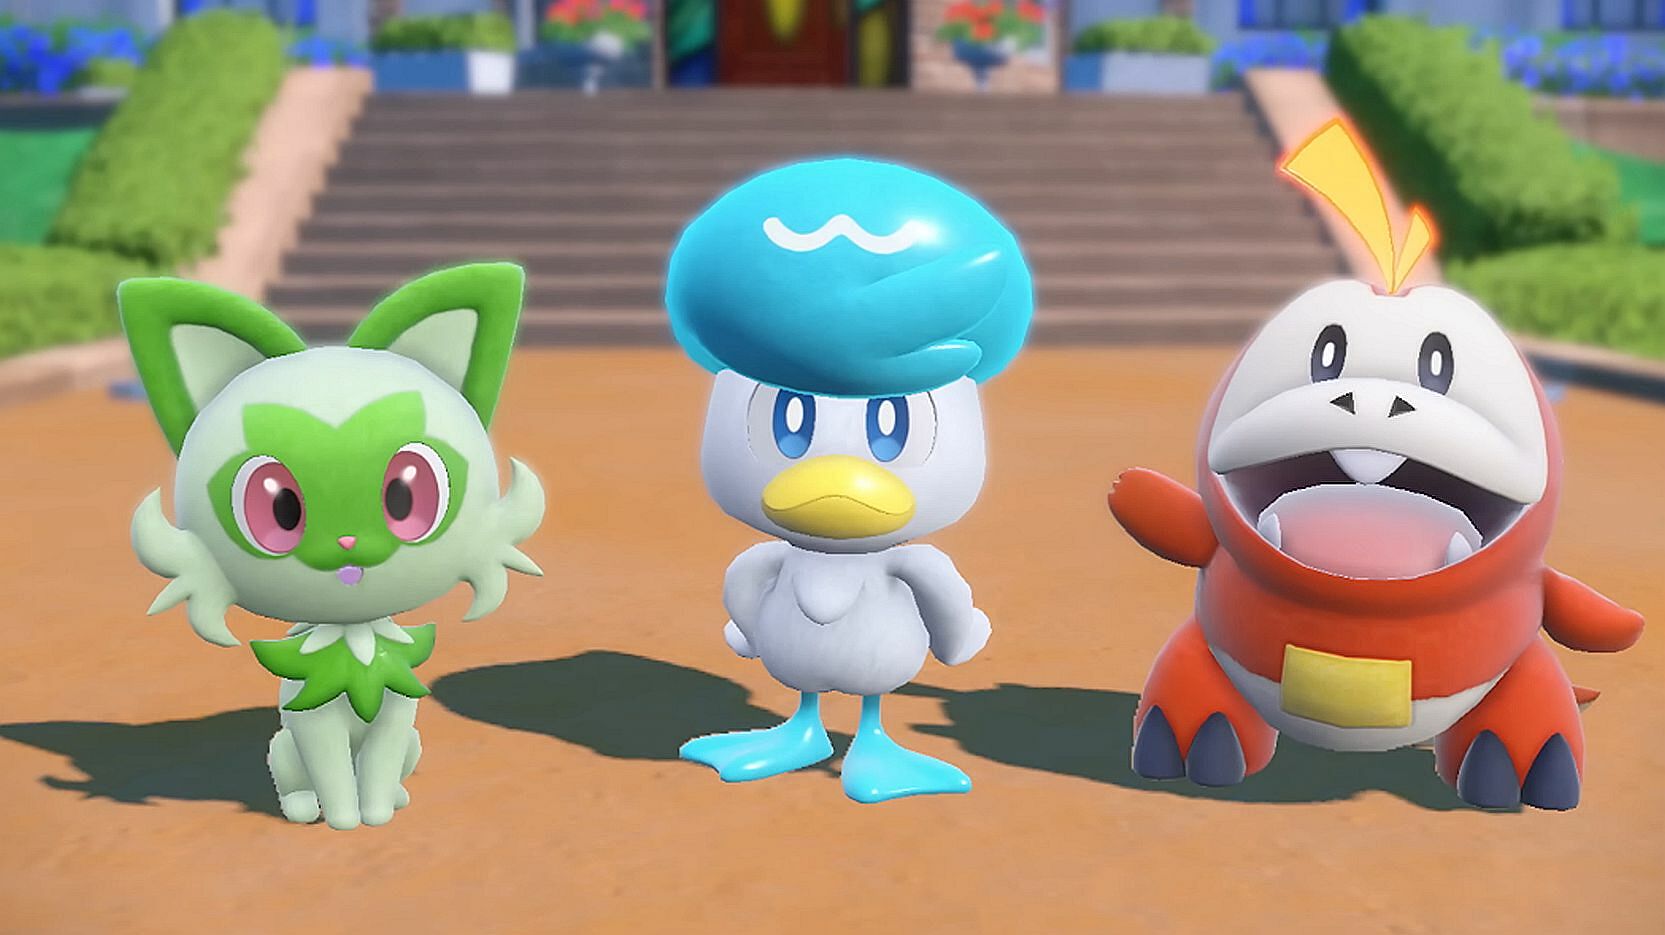 Pokemon Scarlet and Violet trailer gives you an overview of the world and the game’s features